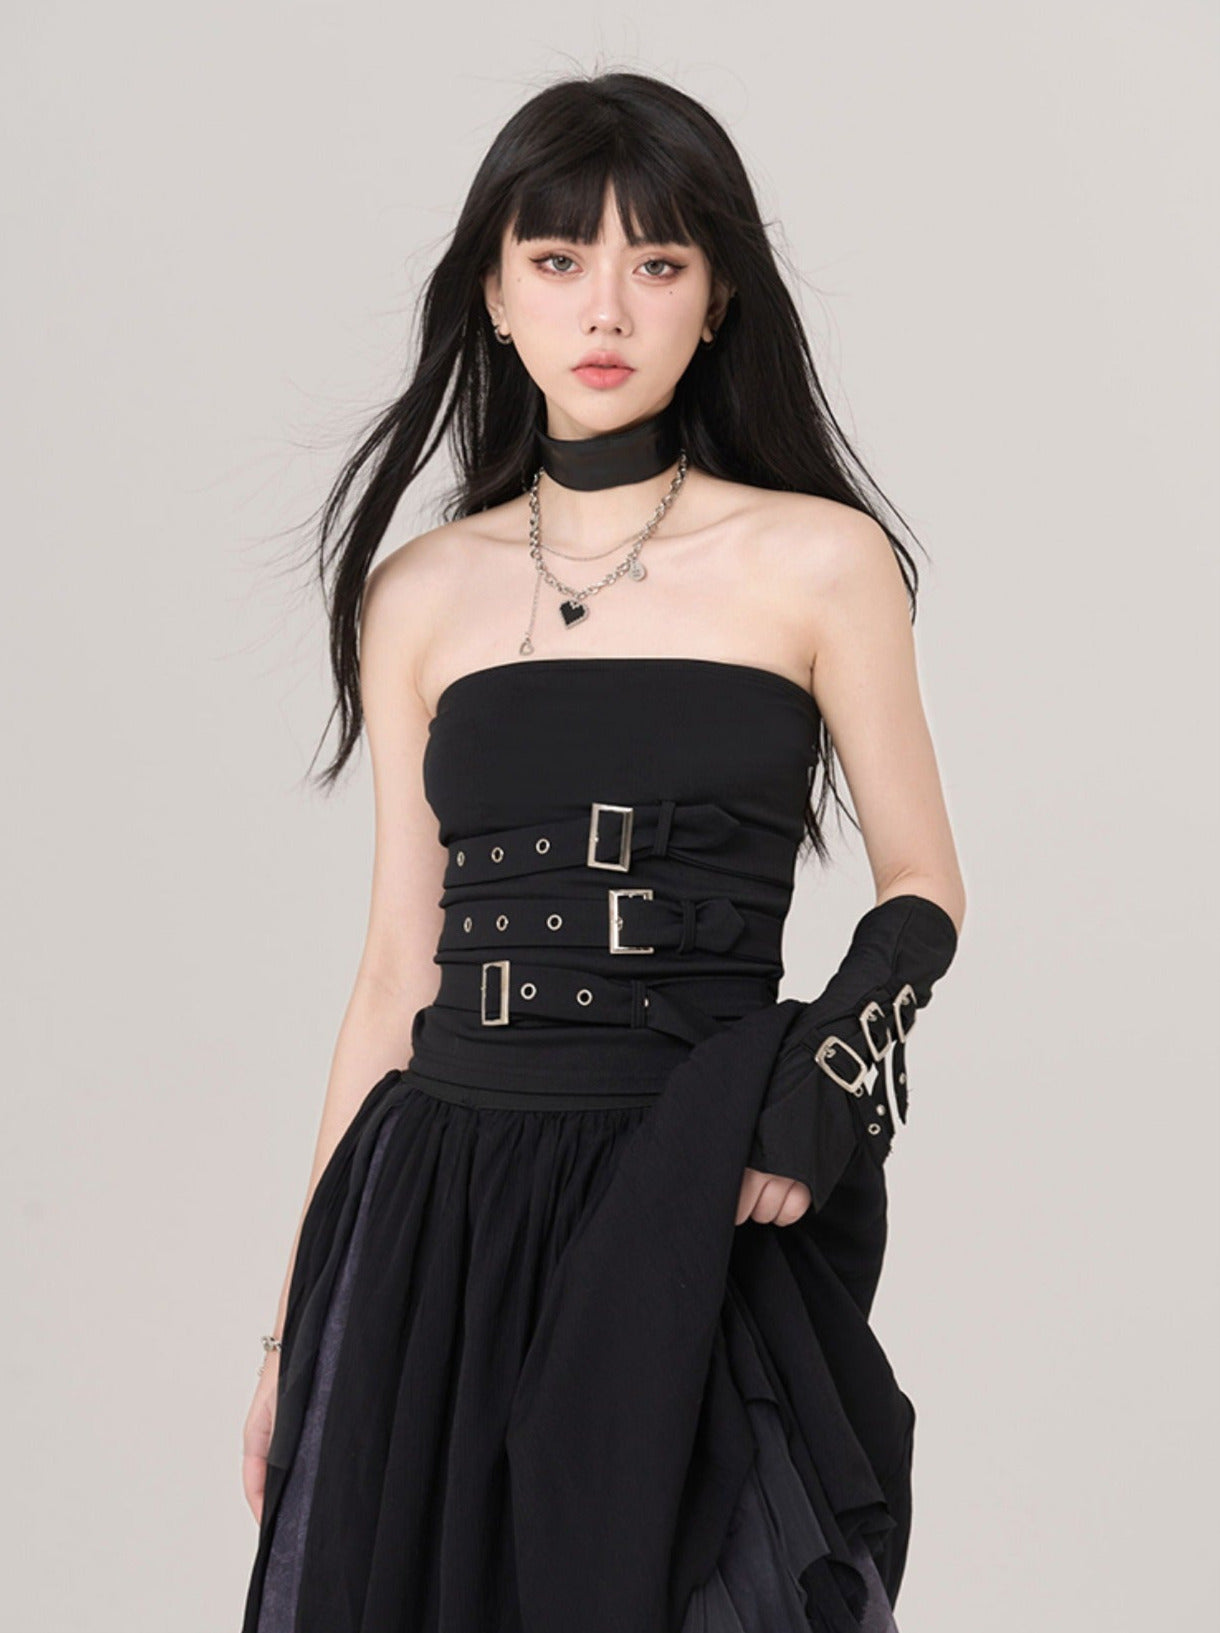 Dark Cool Buckle Tube Top + Arm Cover